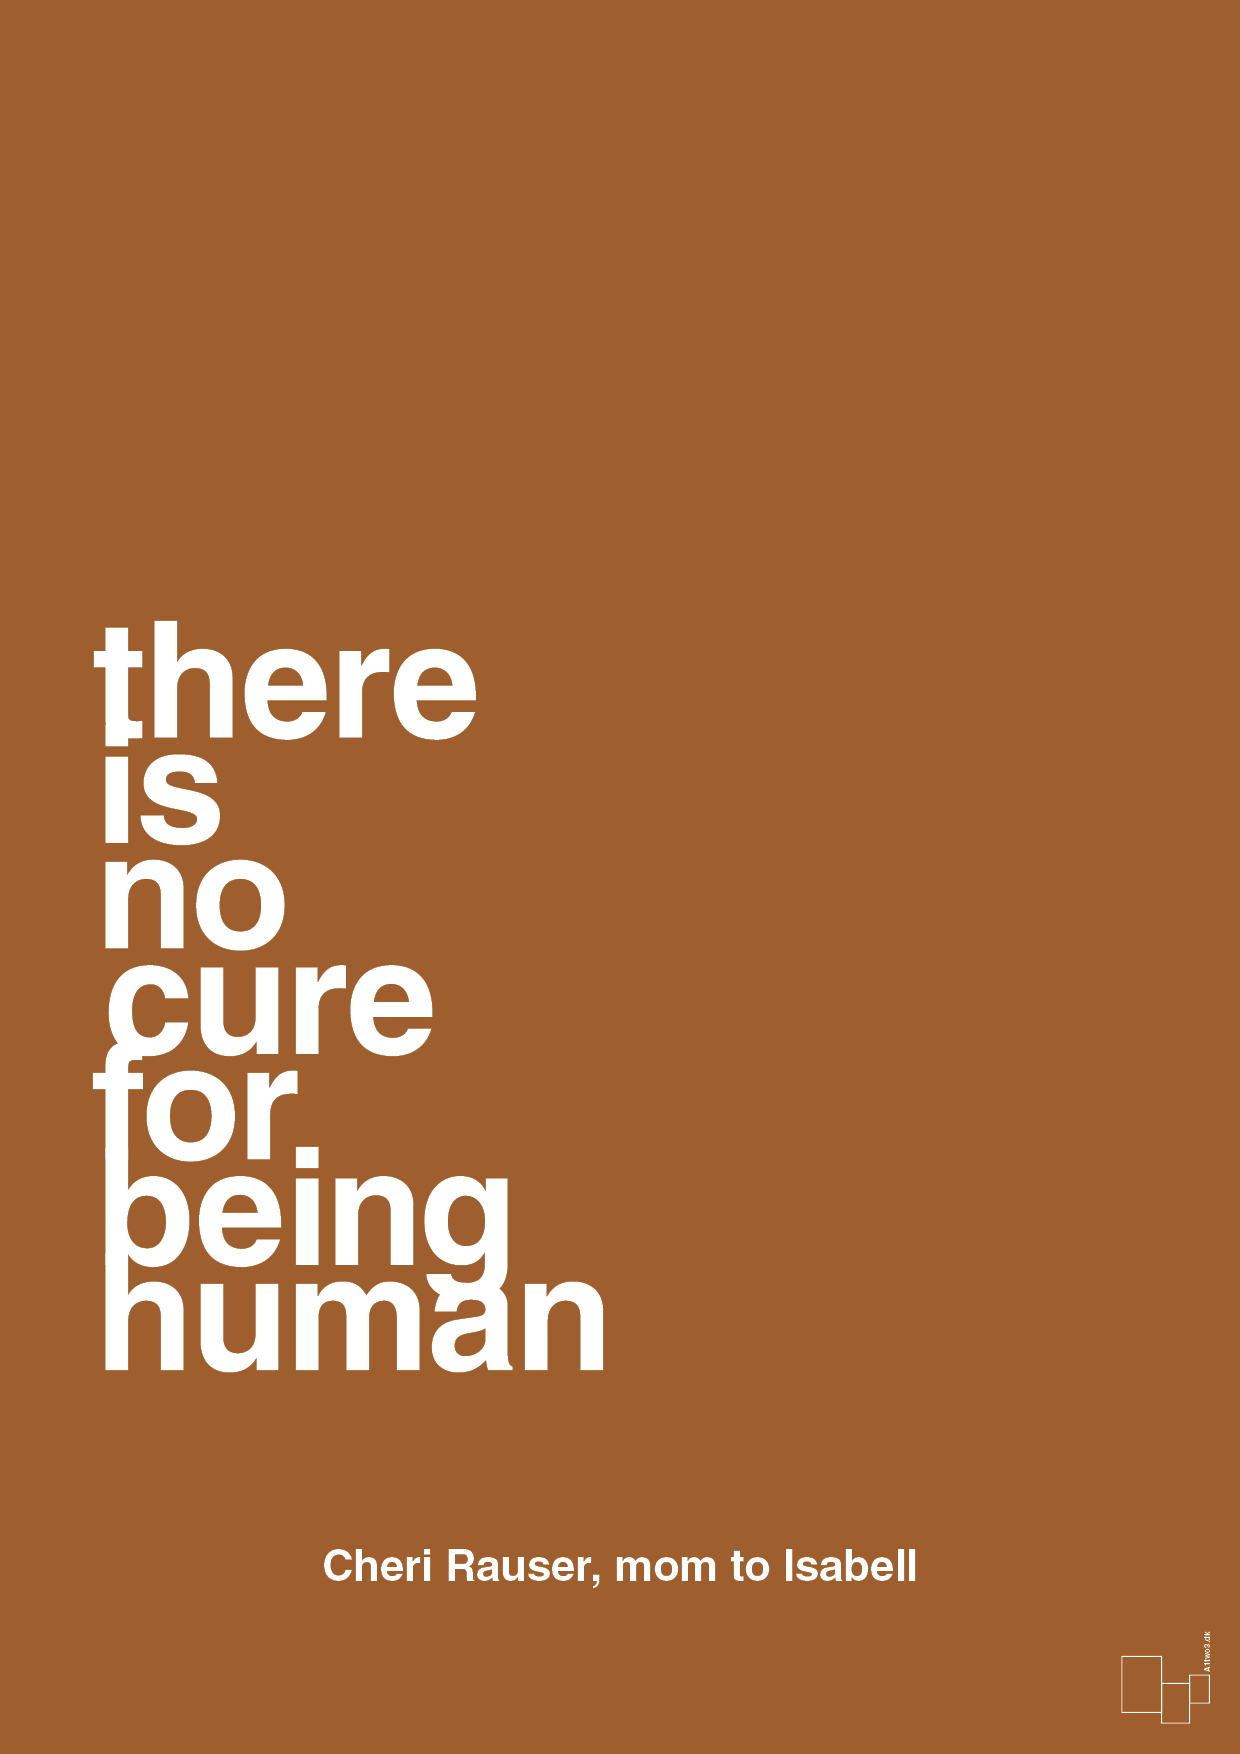 there is no cure for being human - Plakat med Samfund i Cognac